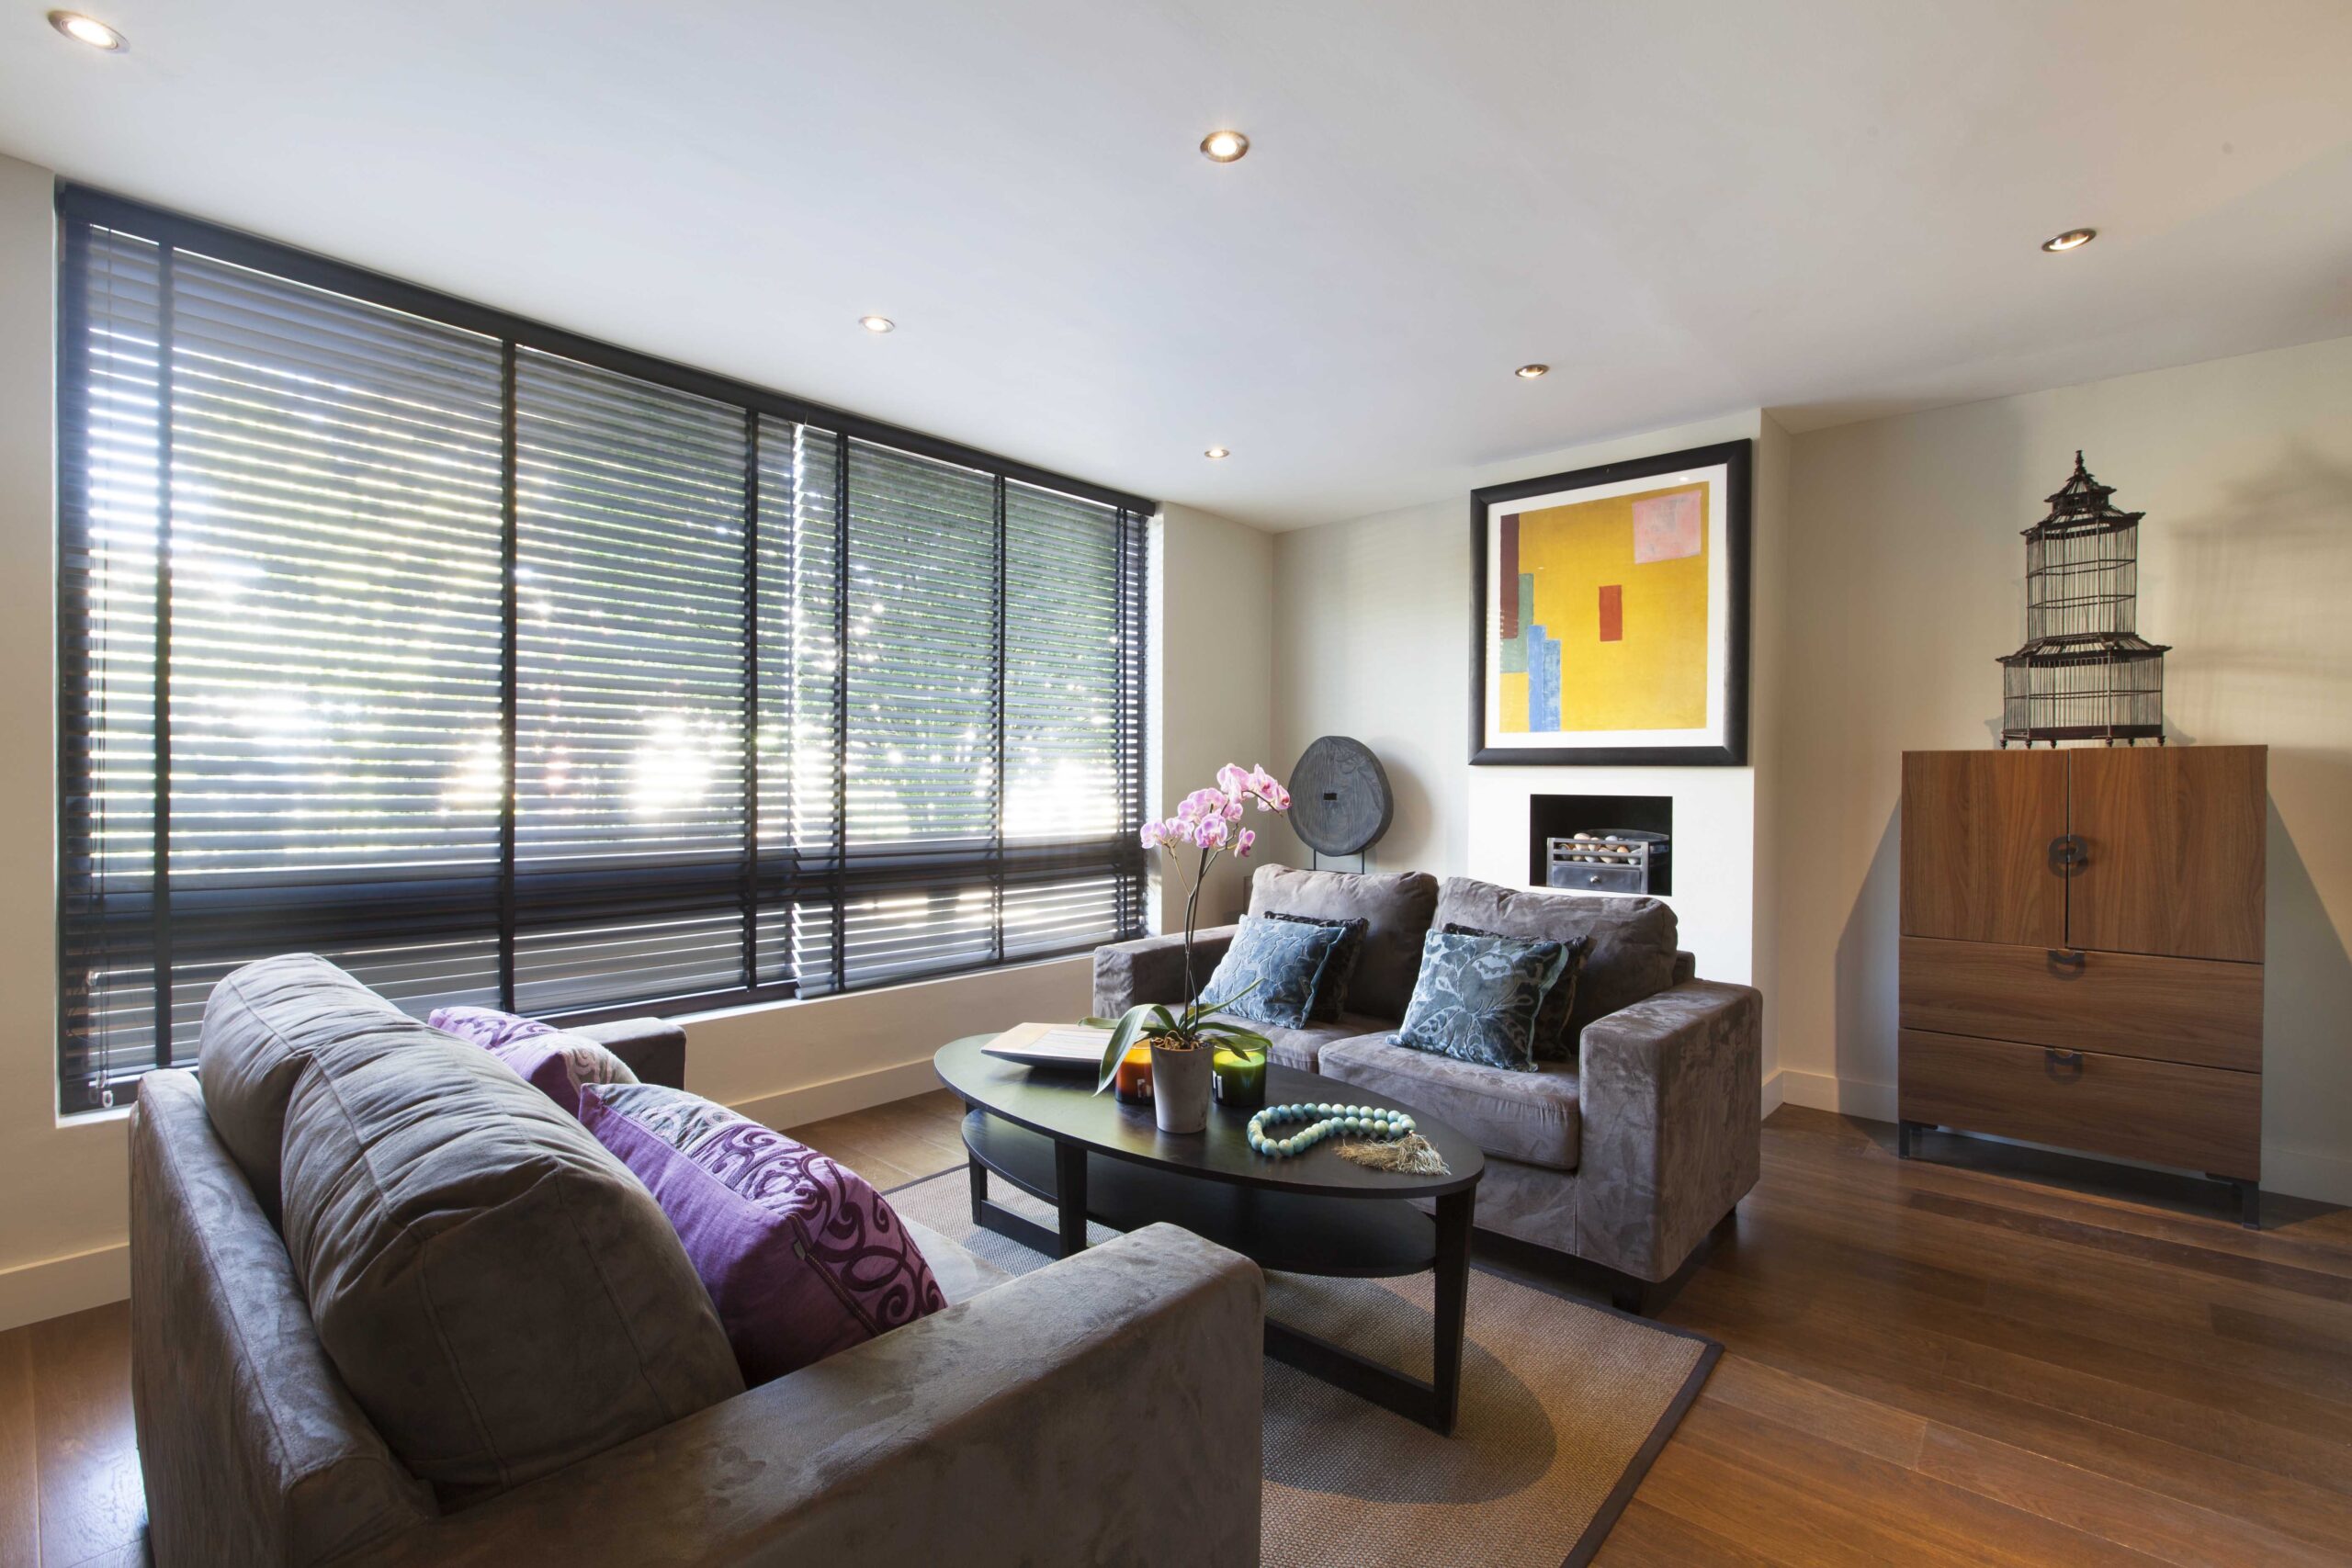 Luxury design-led living room of a Notting Hill house for rent